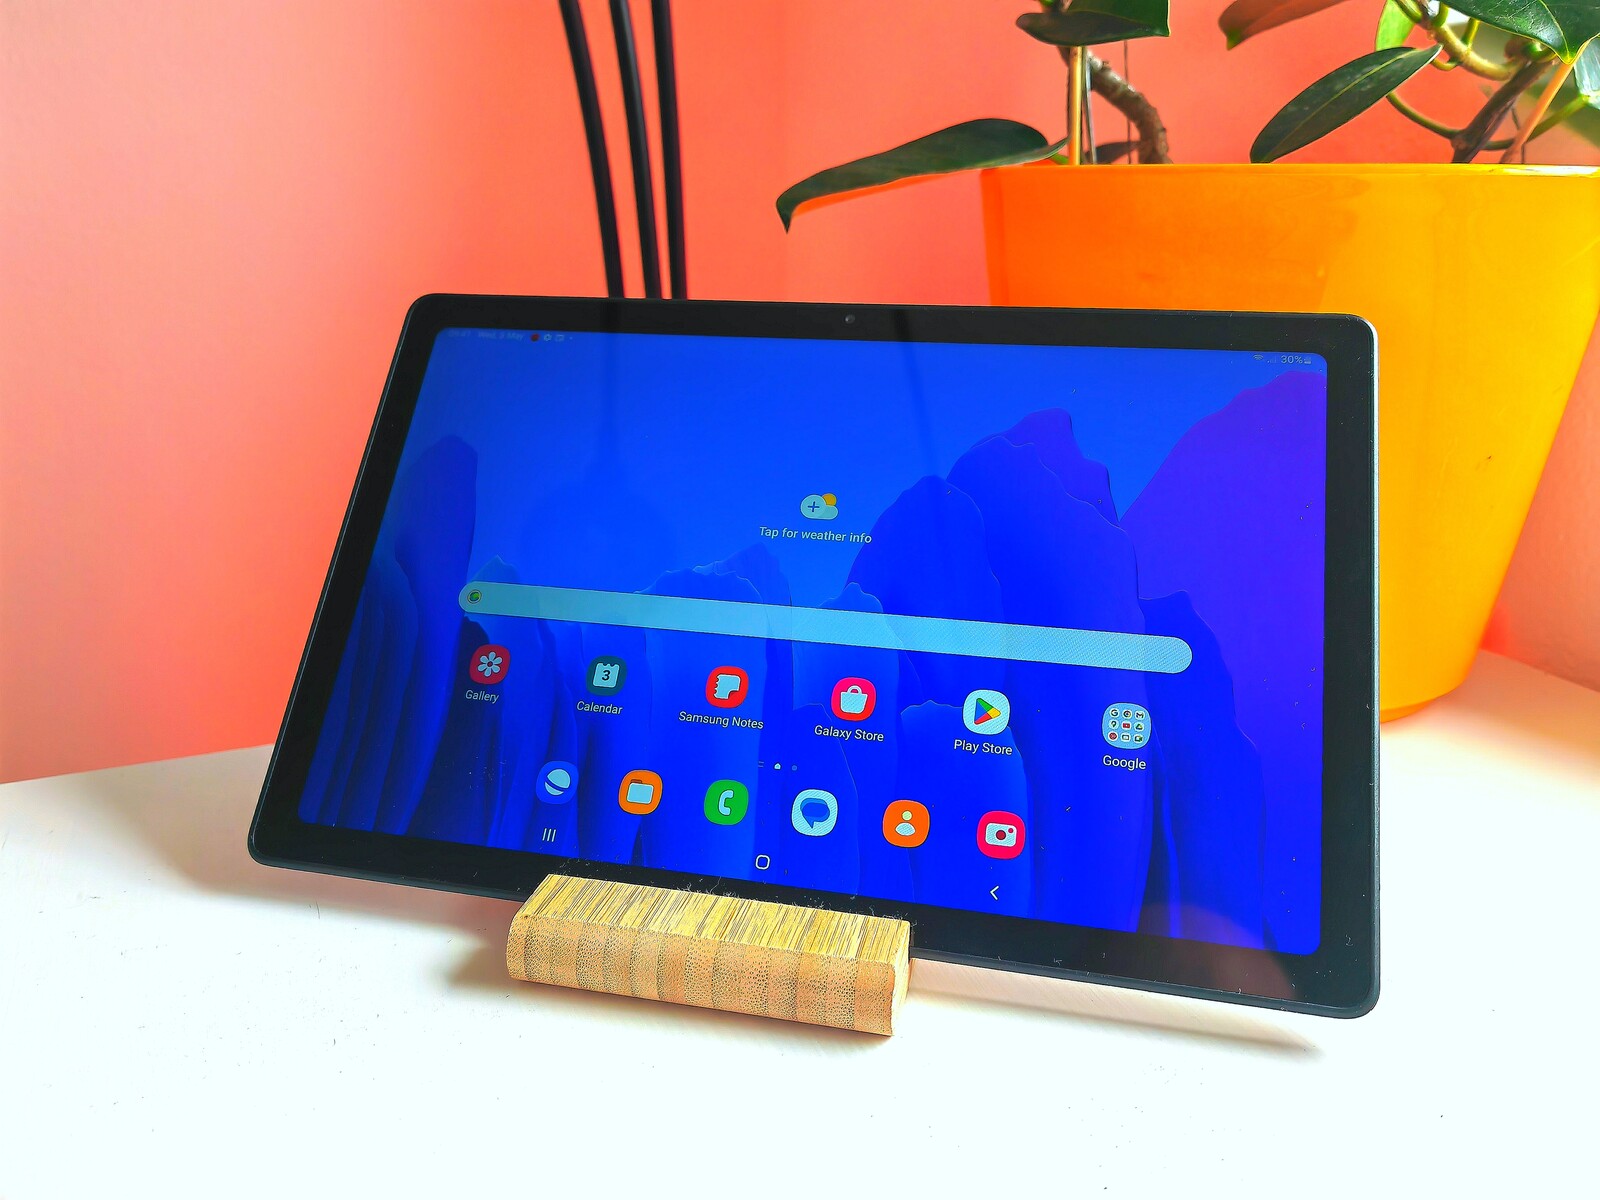 Realme Pad Review: A fun tablet for content consumption, not creation